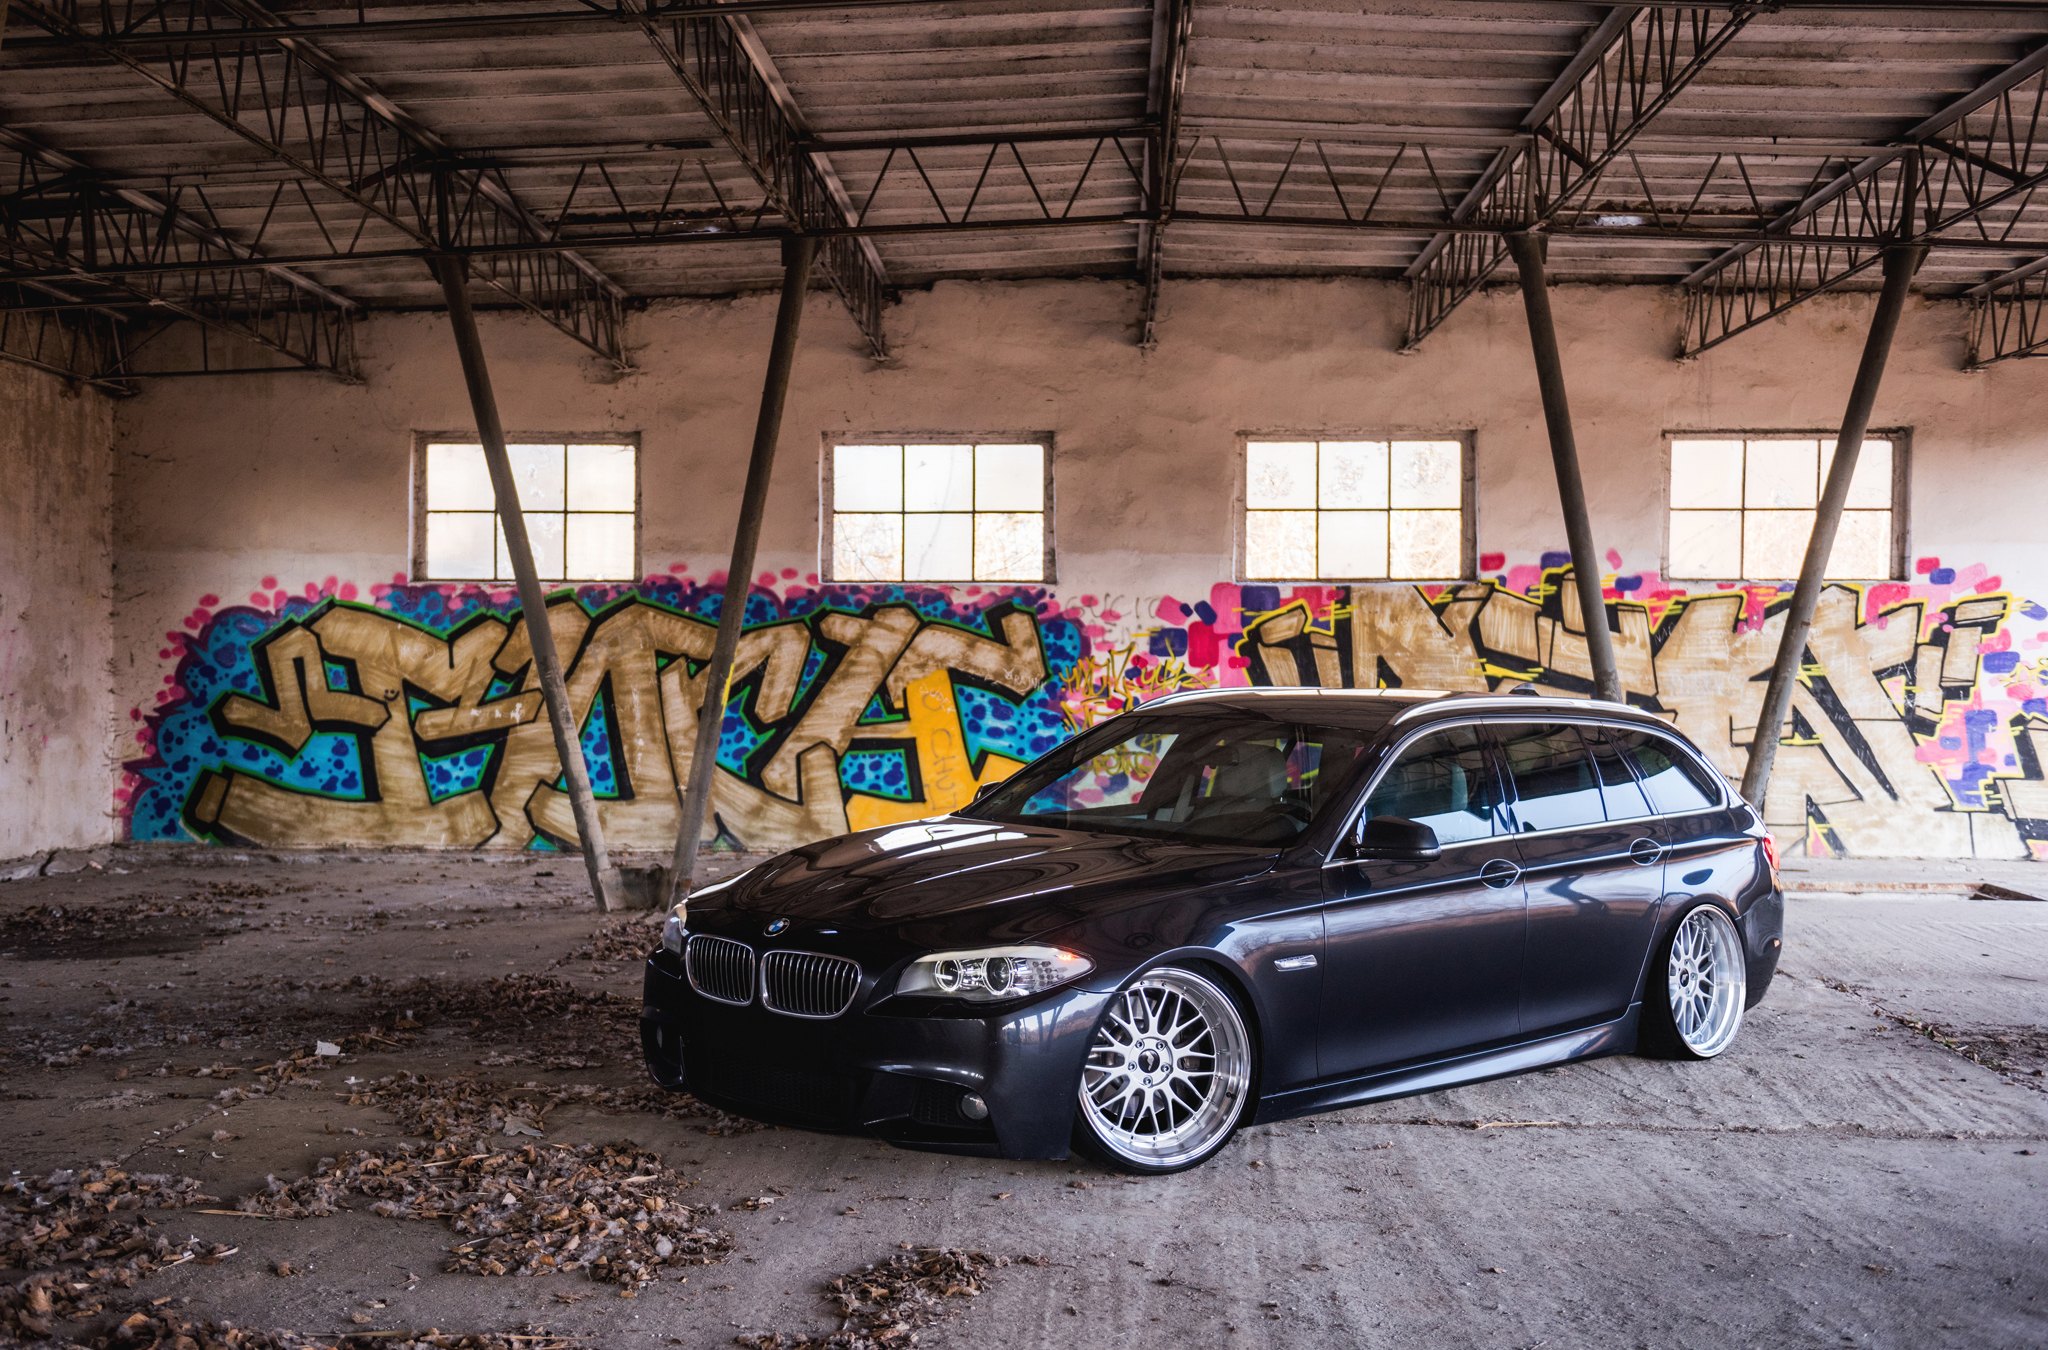 Aftermarket Projector Headlights on Black BMW 5-Series - Photo by JR Wheels